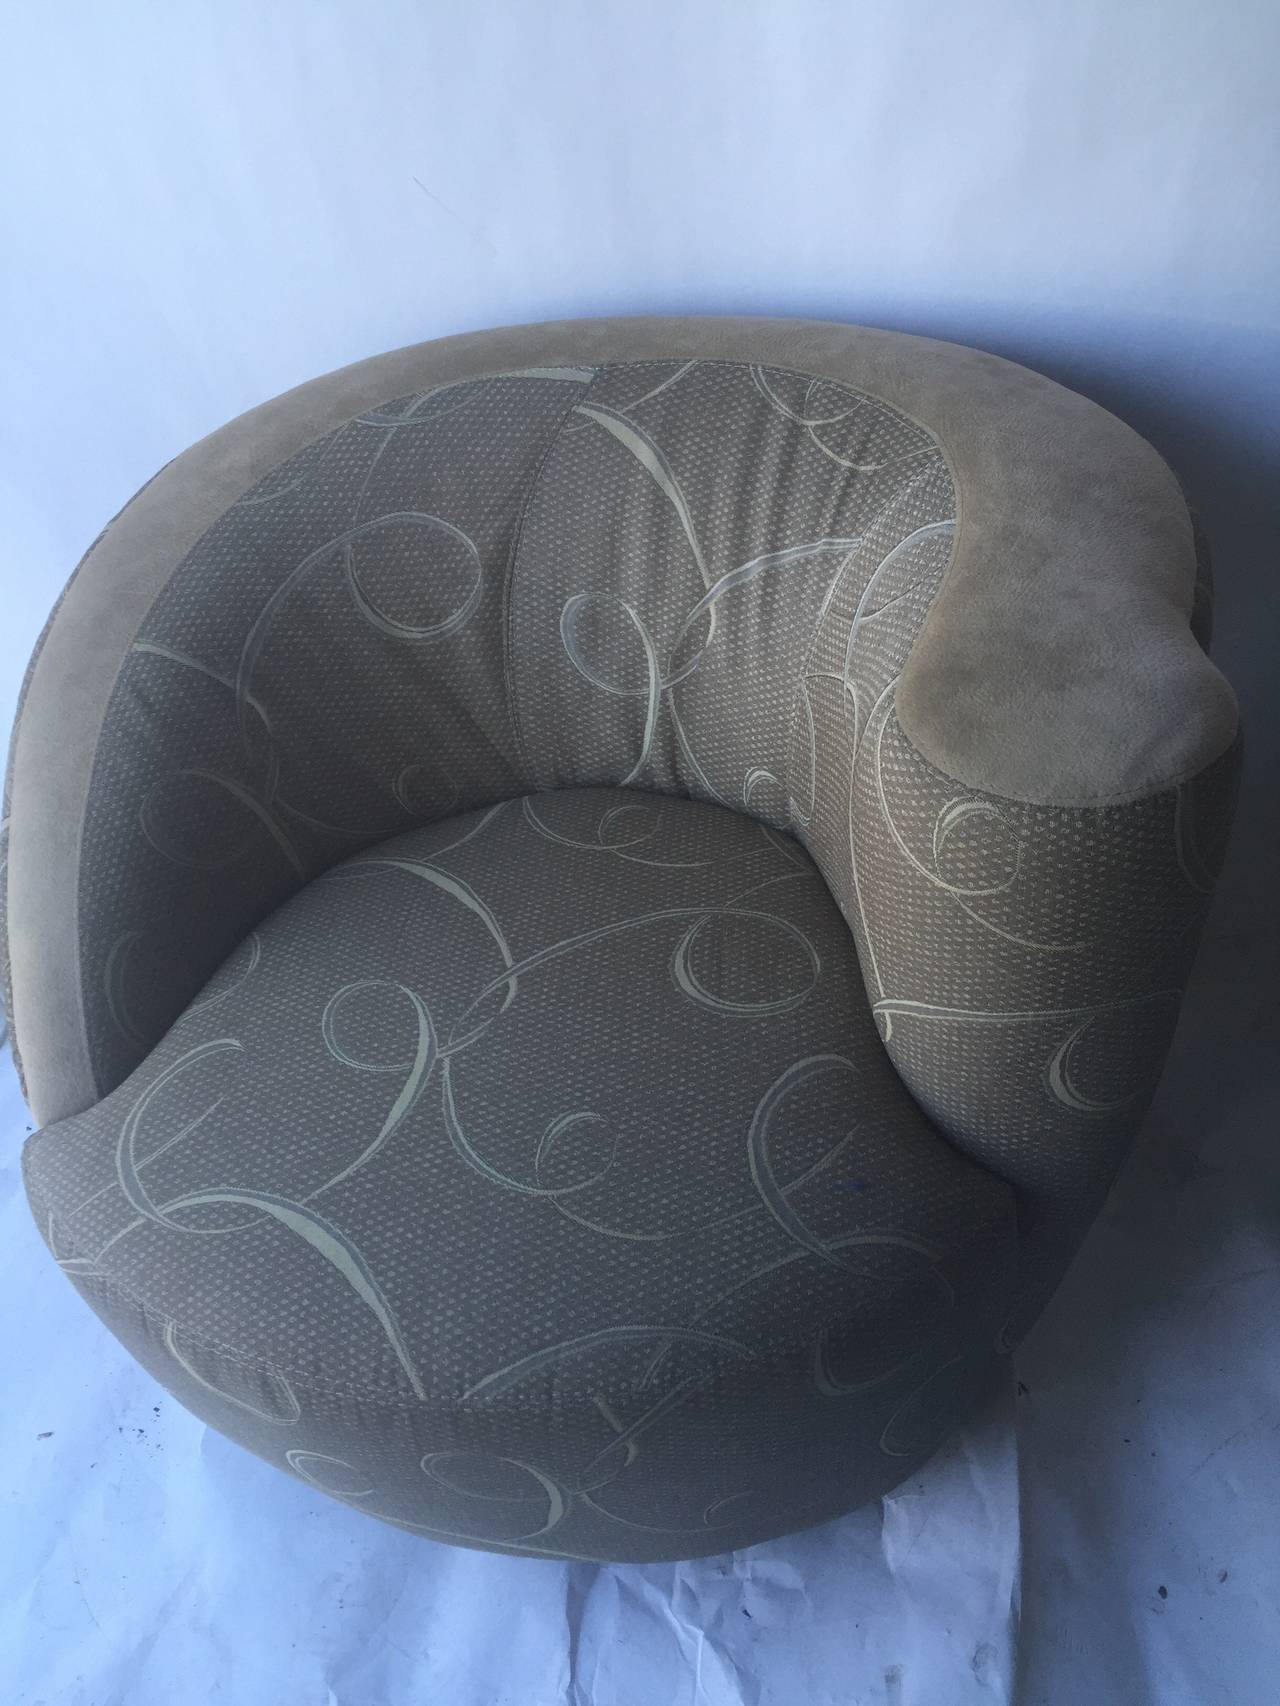 These are a nice pair of swivel chairs in a nautilus shell swirl design made be Vladimir Kagan circa 1980's,they retain the original highend swirl accented fabric of their making.
They would be fine addition to any modern decor.